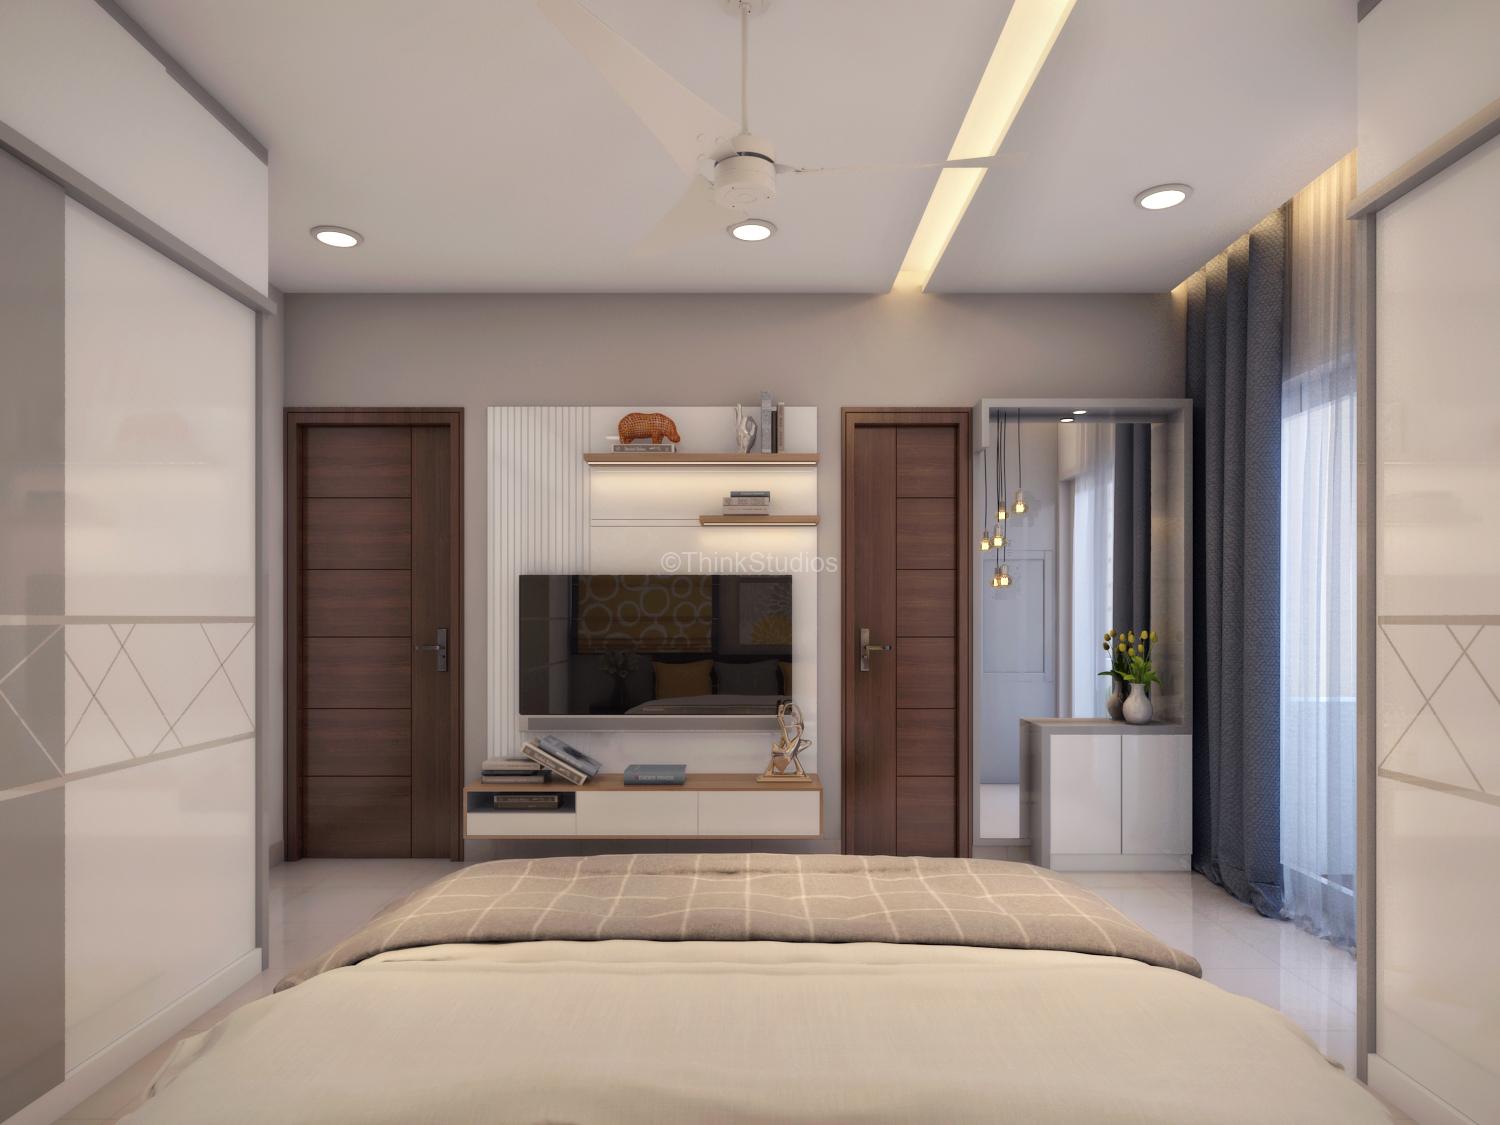 Architecture Designers Firms in Hyderabad - Renovation of Residential Bungalow Interiors_Bungalow in Bangalore _1